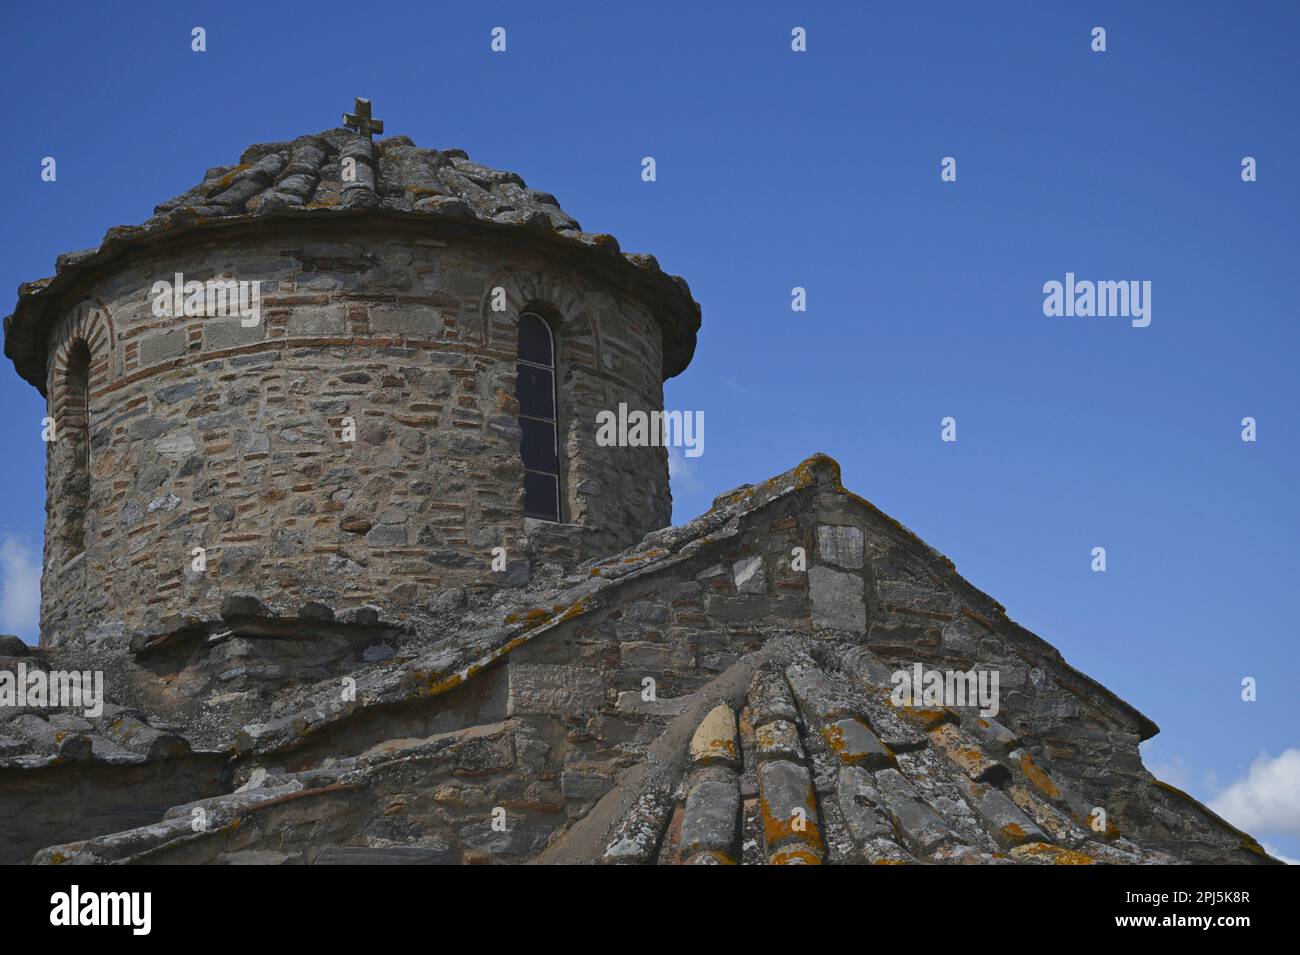 Landscape with scenic dome view of Aghios Petros a 12th century rectangular cruciform Byzantine church in Kalyvia Thorikou, Attica Greece. Stock Photo